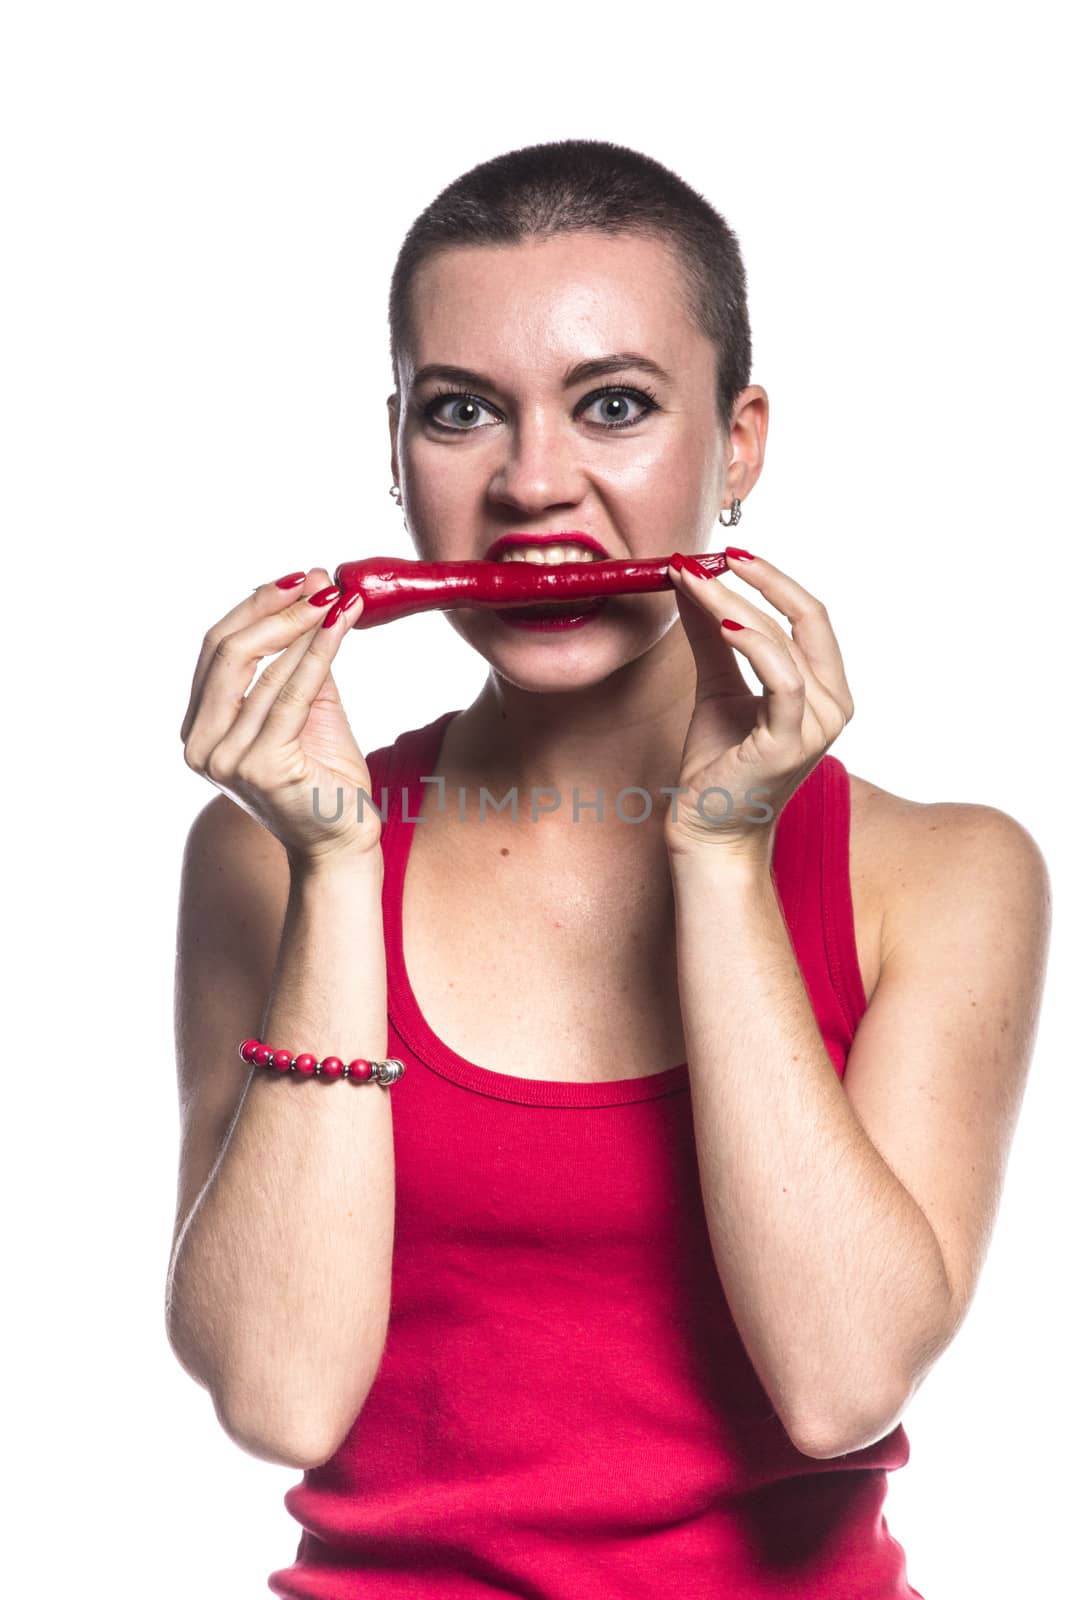 Woman with chili pepper on white background